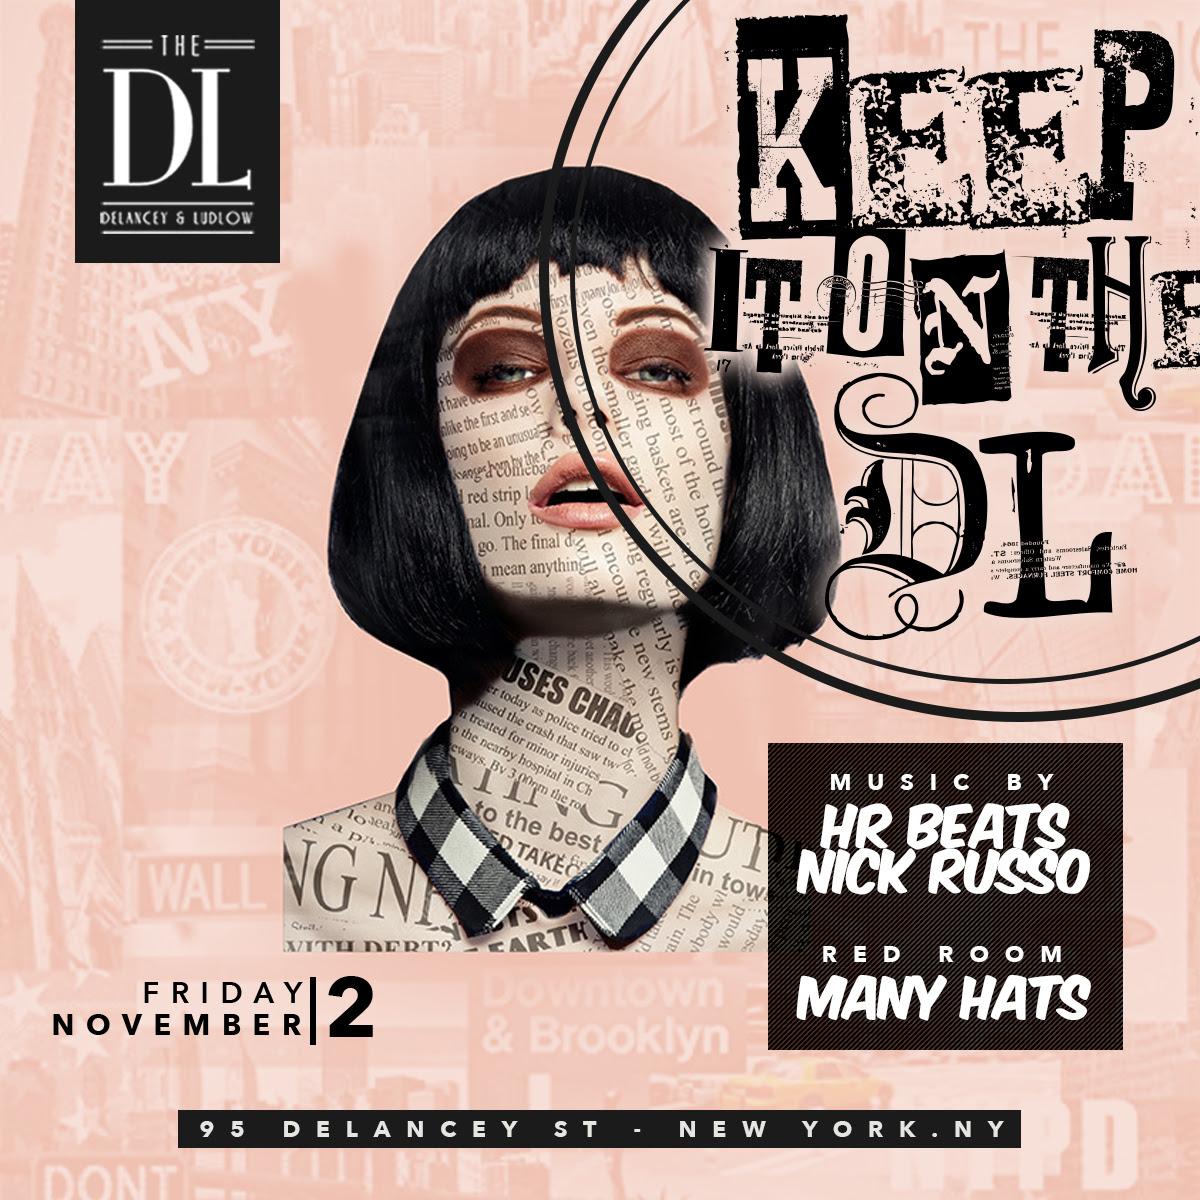 THE DL - Keep It On the DL FRIDAYS - FREE ENTRY